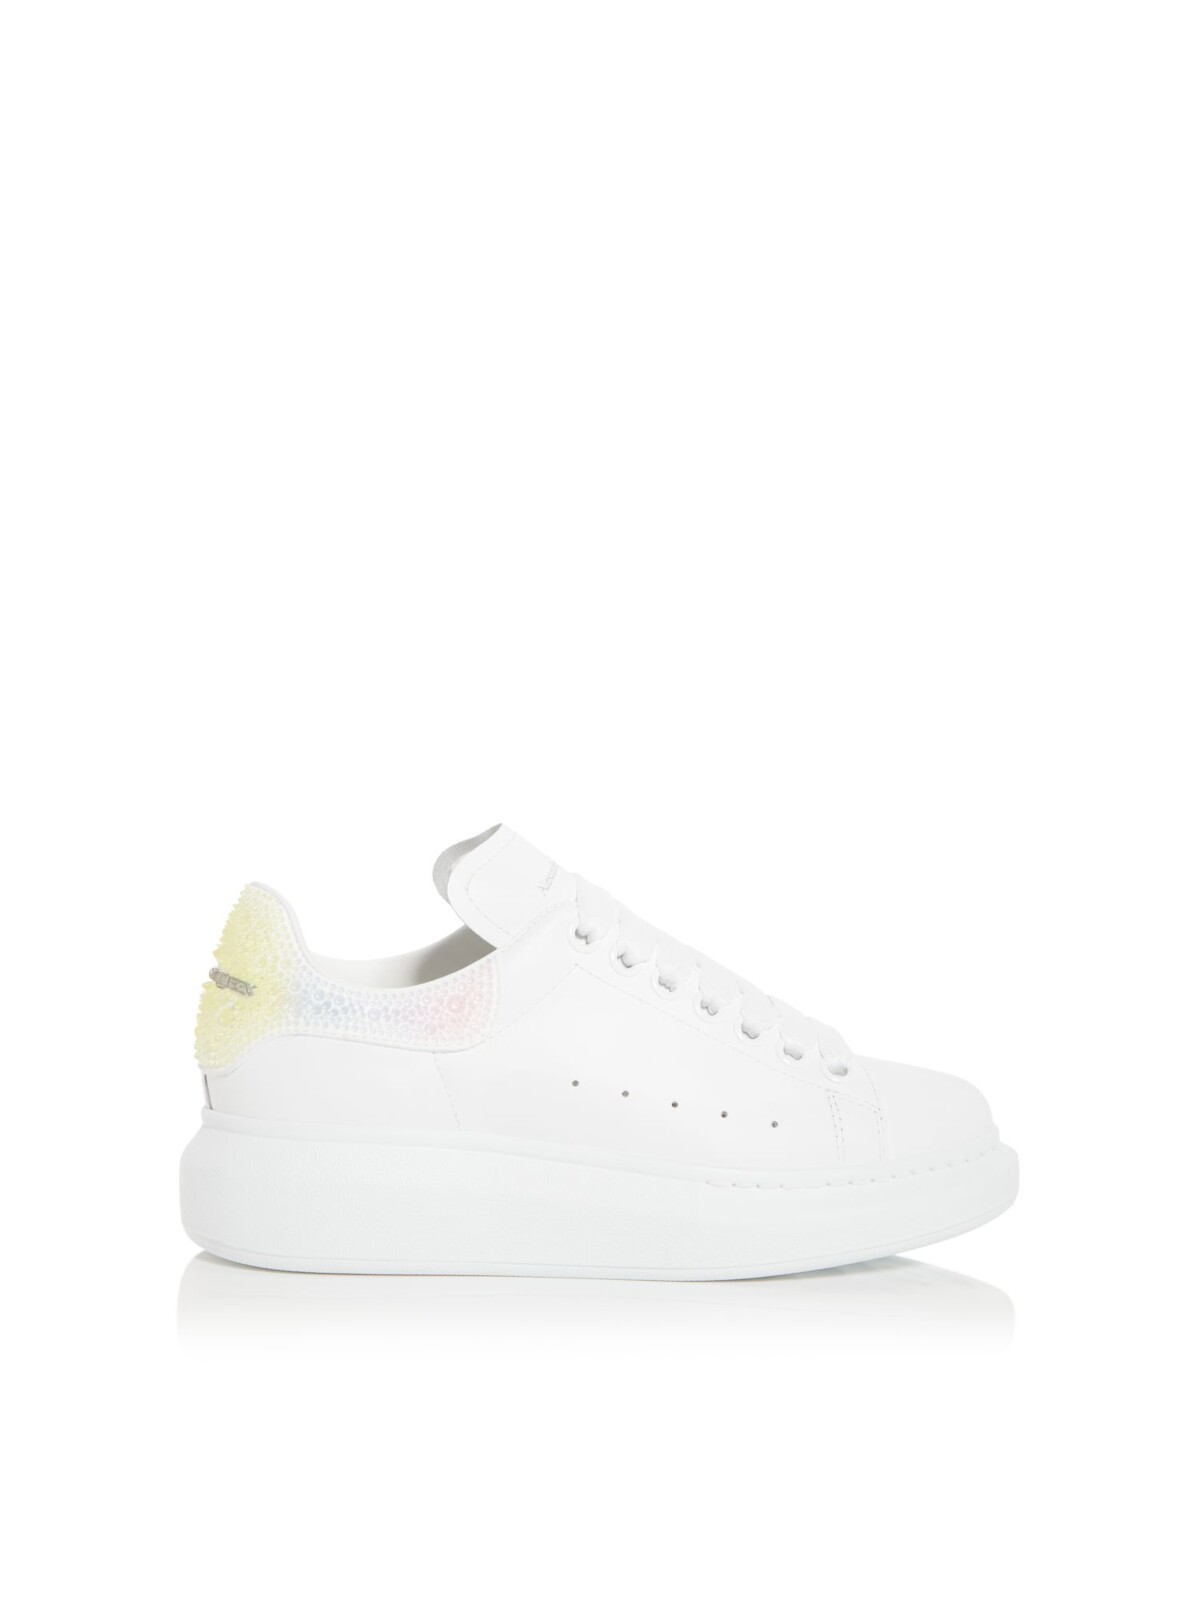 ALEXANDER MCQUEEN Womens White 1" Platform Embellished Padded Round Toe Wedge Lace-Up Sneakers Shoes 40